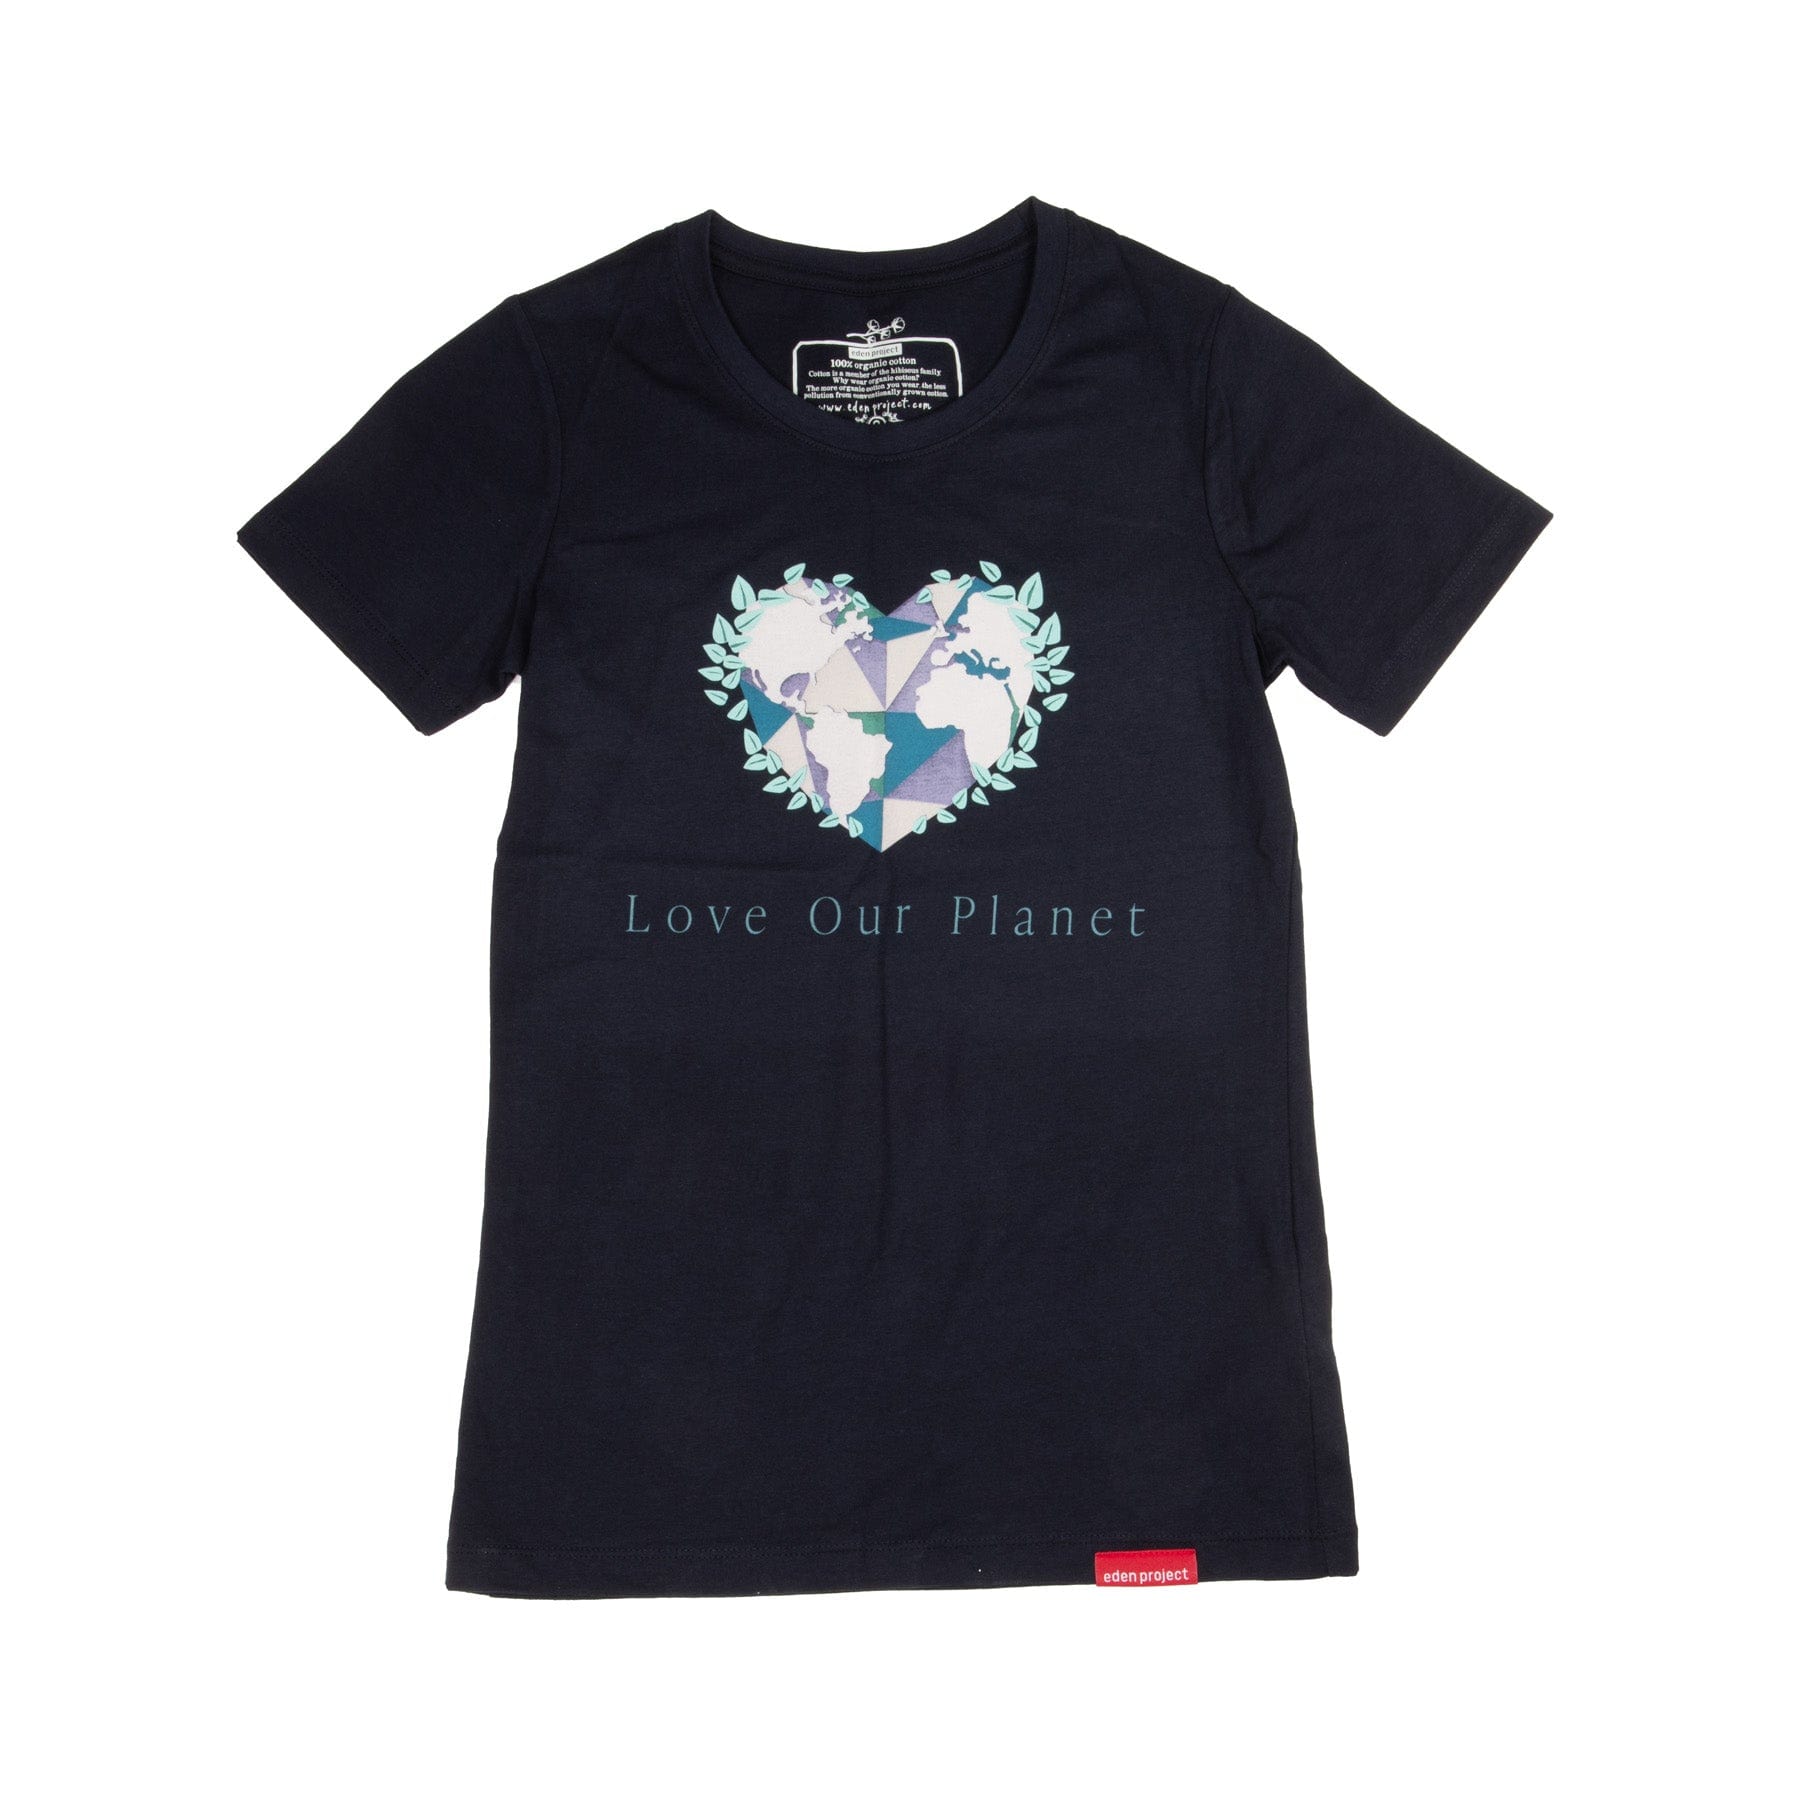 Navy blue eco-friendly t-shirt with 'Love Our Planet' text and heart-shaped earth graphic design surrounded by green leaves, sustainable fashion apparel.